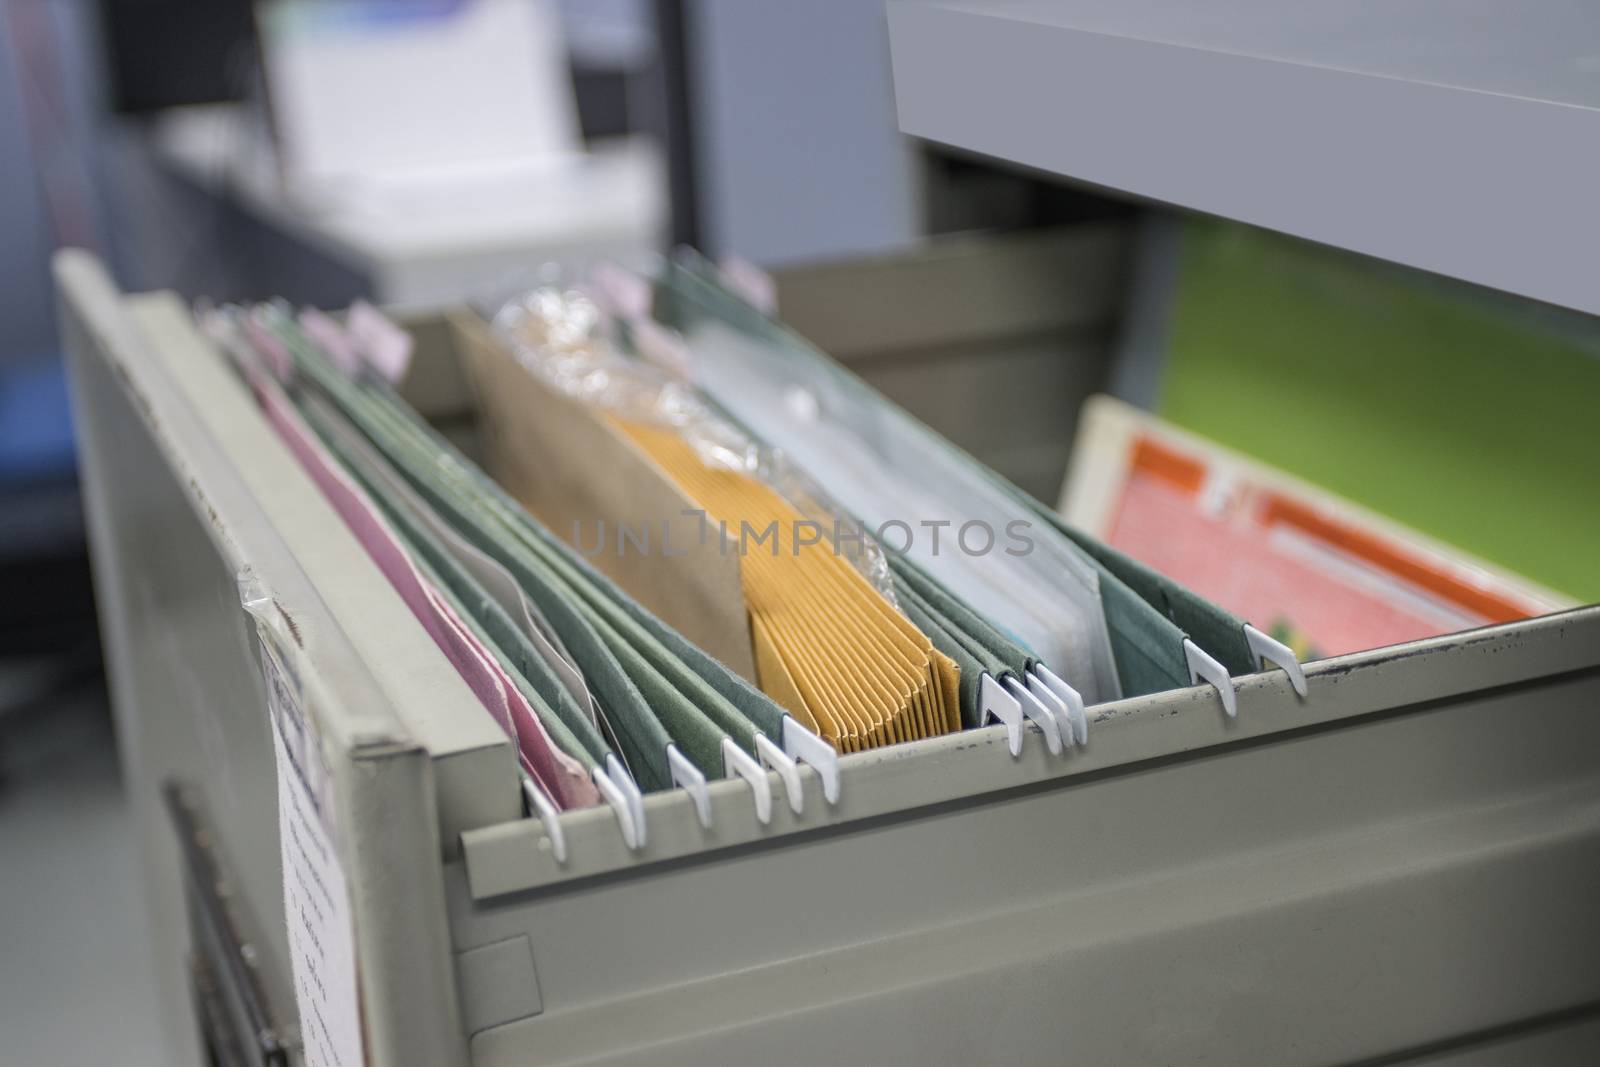 file folder documents In a file cabinet retention concept business office equipment
